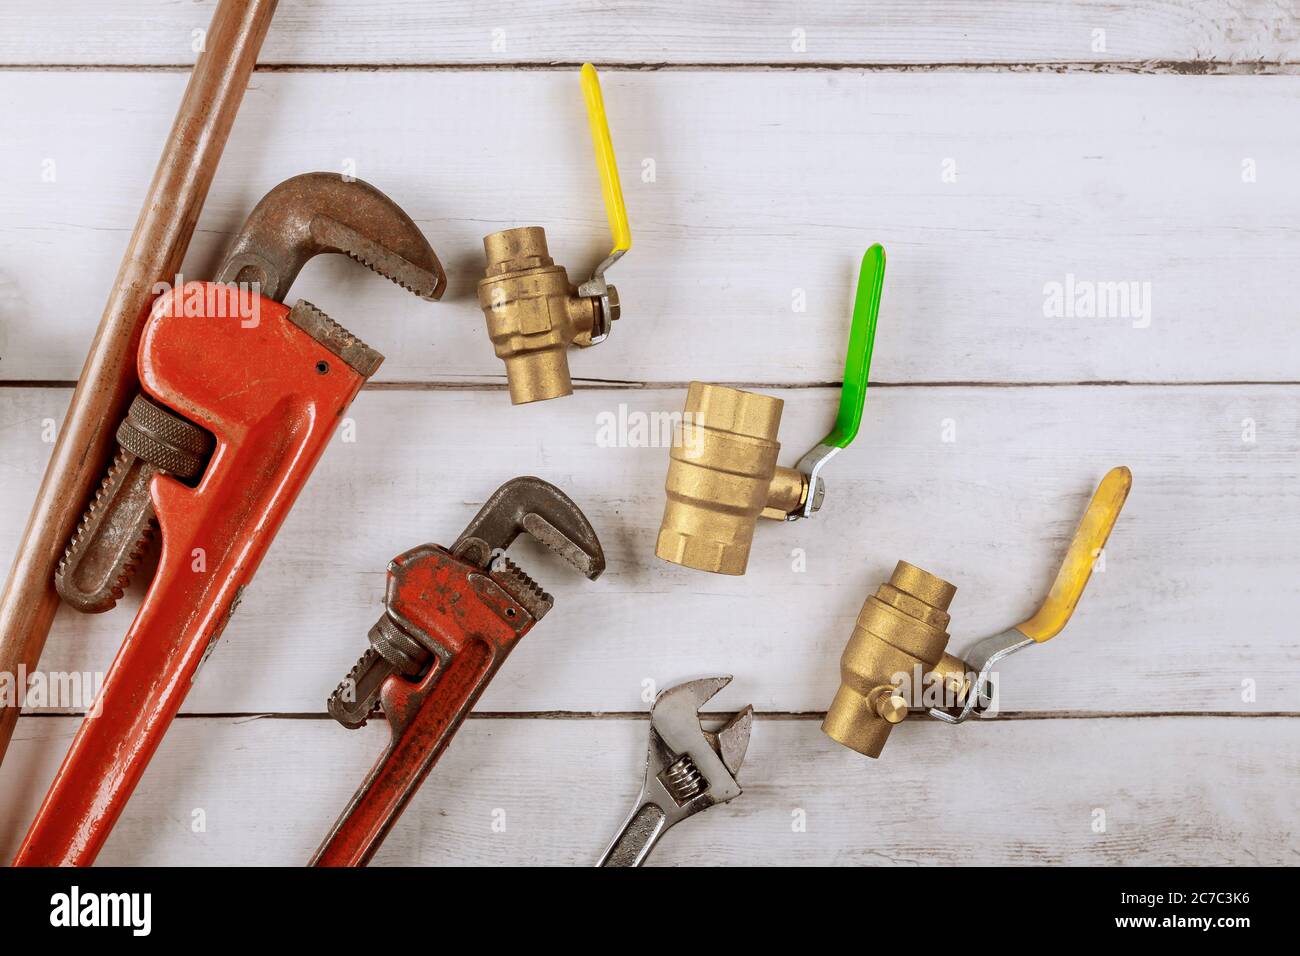 Brass gate valve on wooden background, monkey wrench brass plumbing fittings Stock Photo